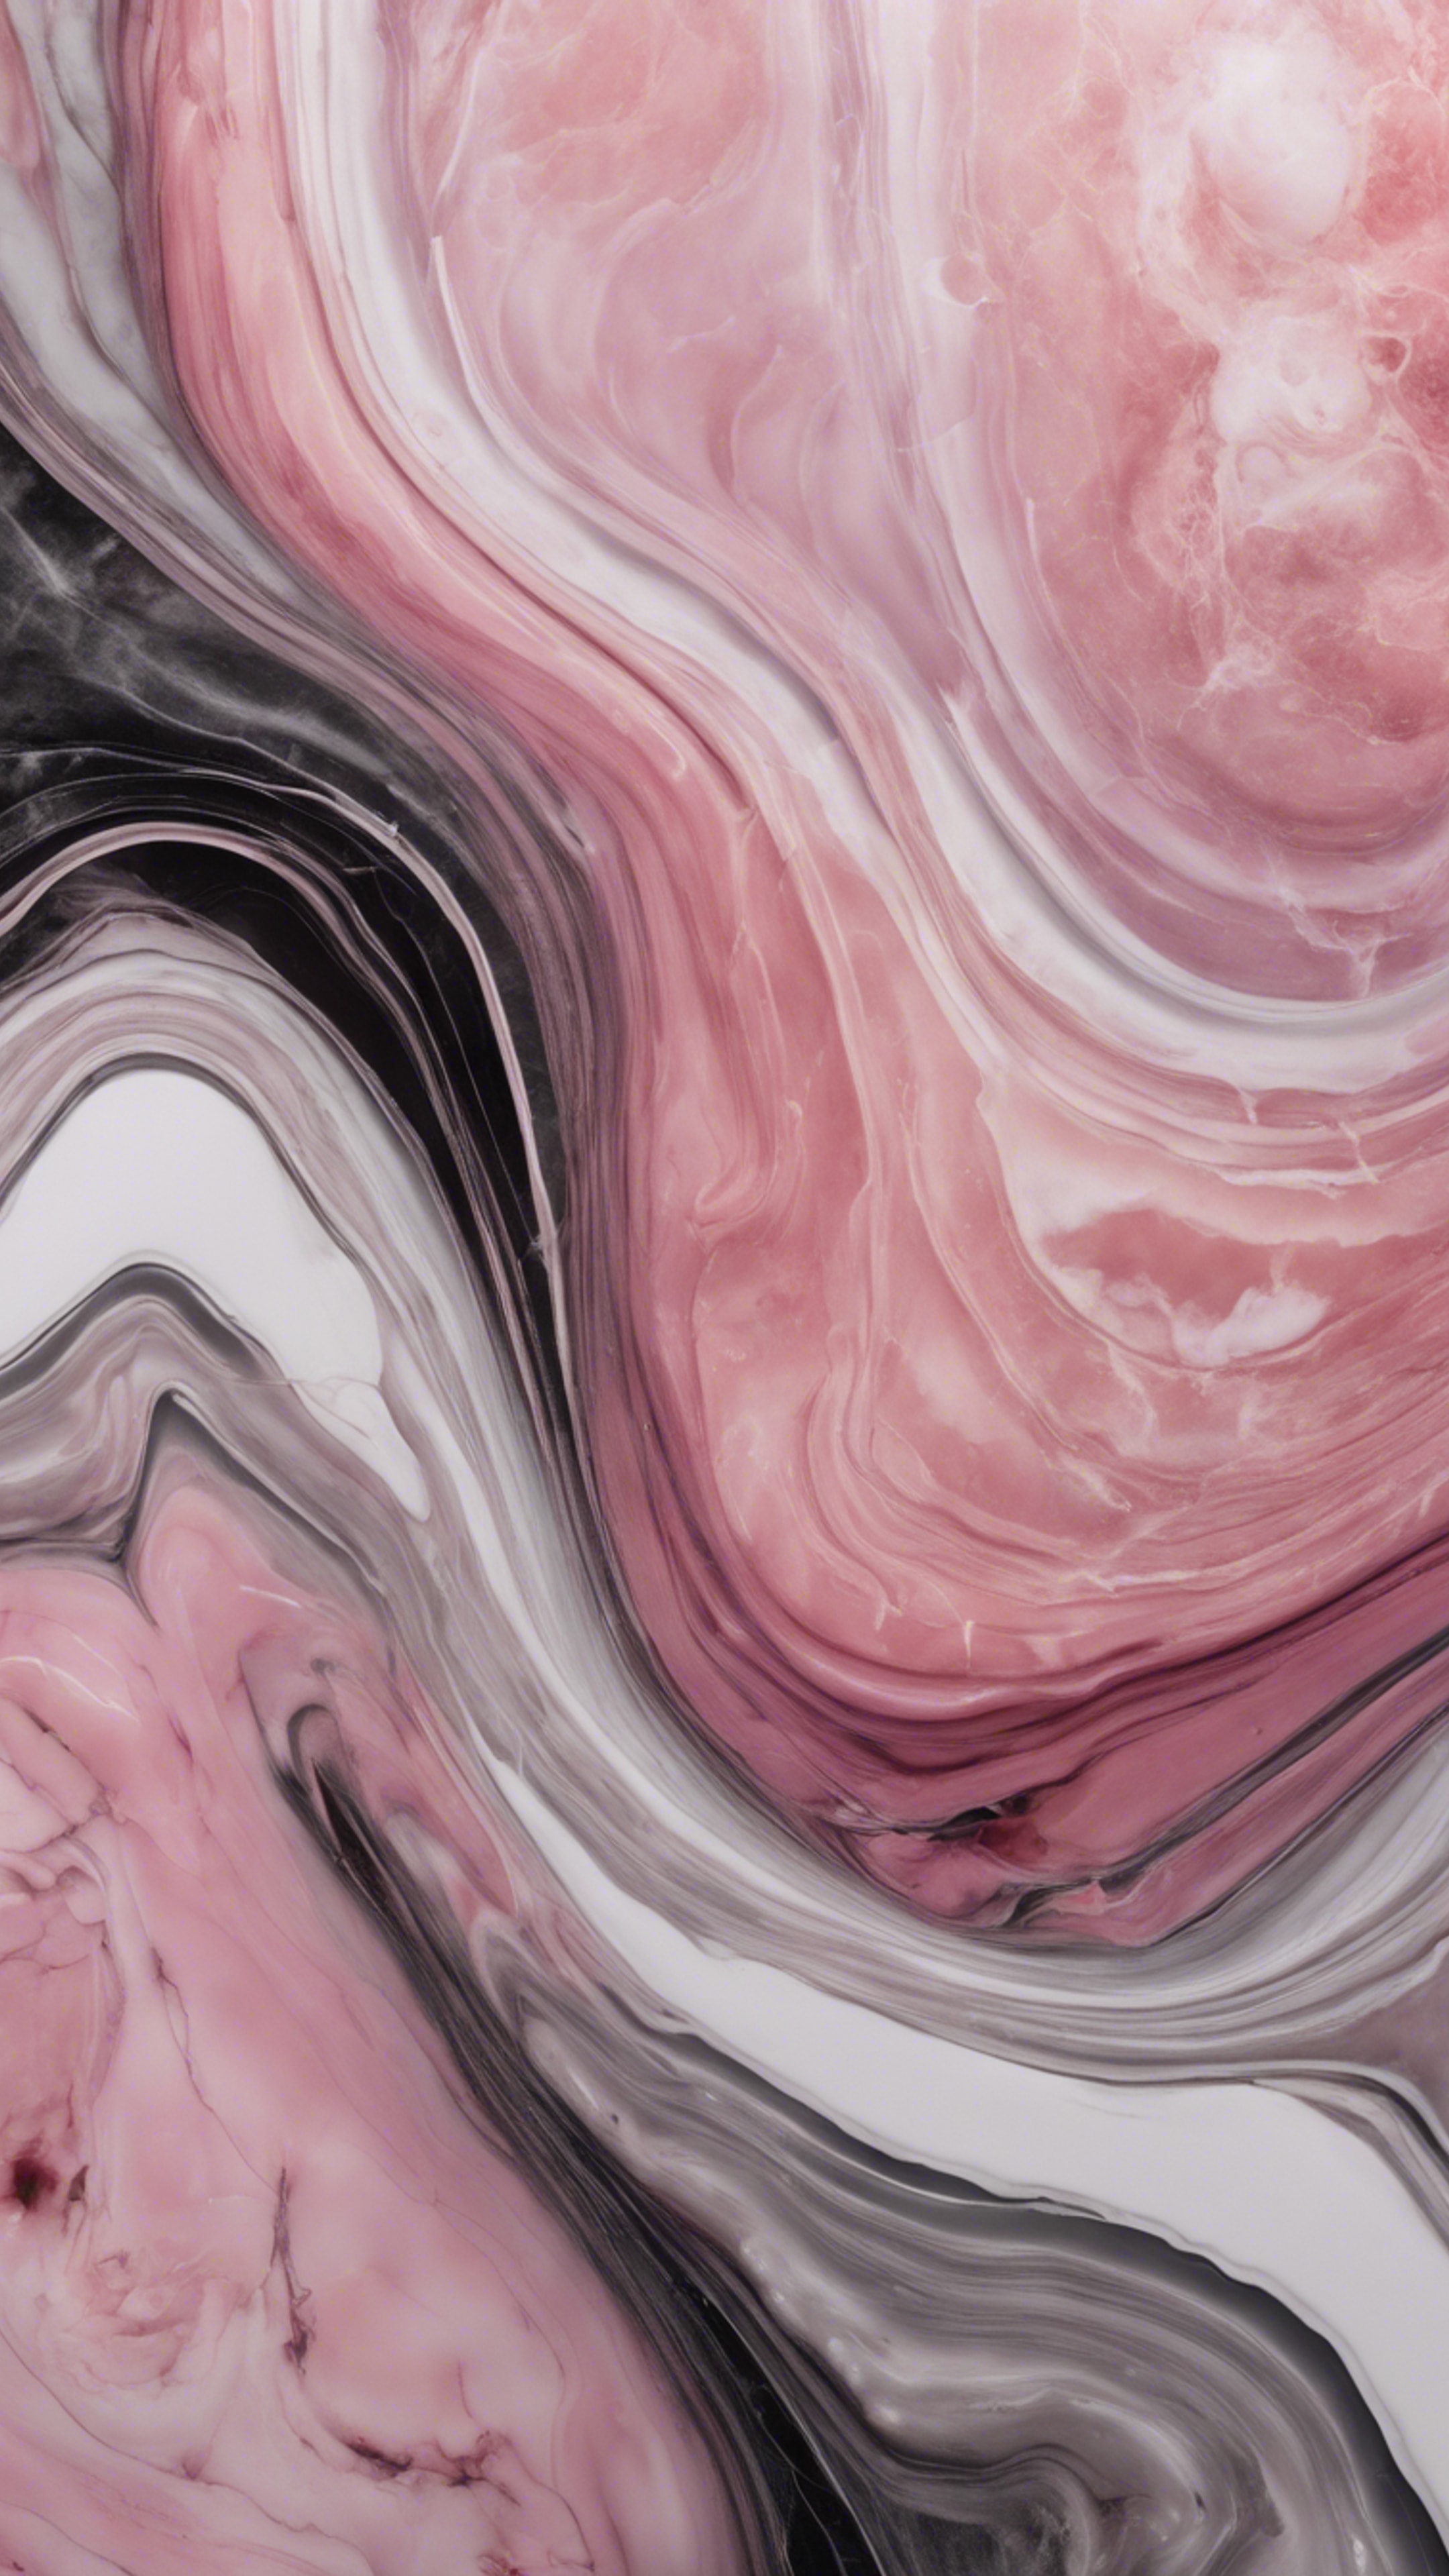 An abstract representation of pink marble, incorporating waves of deep pinks, soft whites, and dark greys. Wallpaper[5ac081f457bf4dc8ac1f]